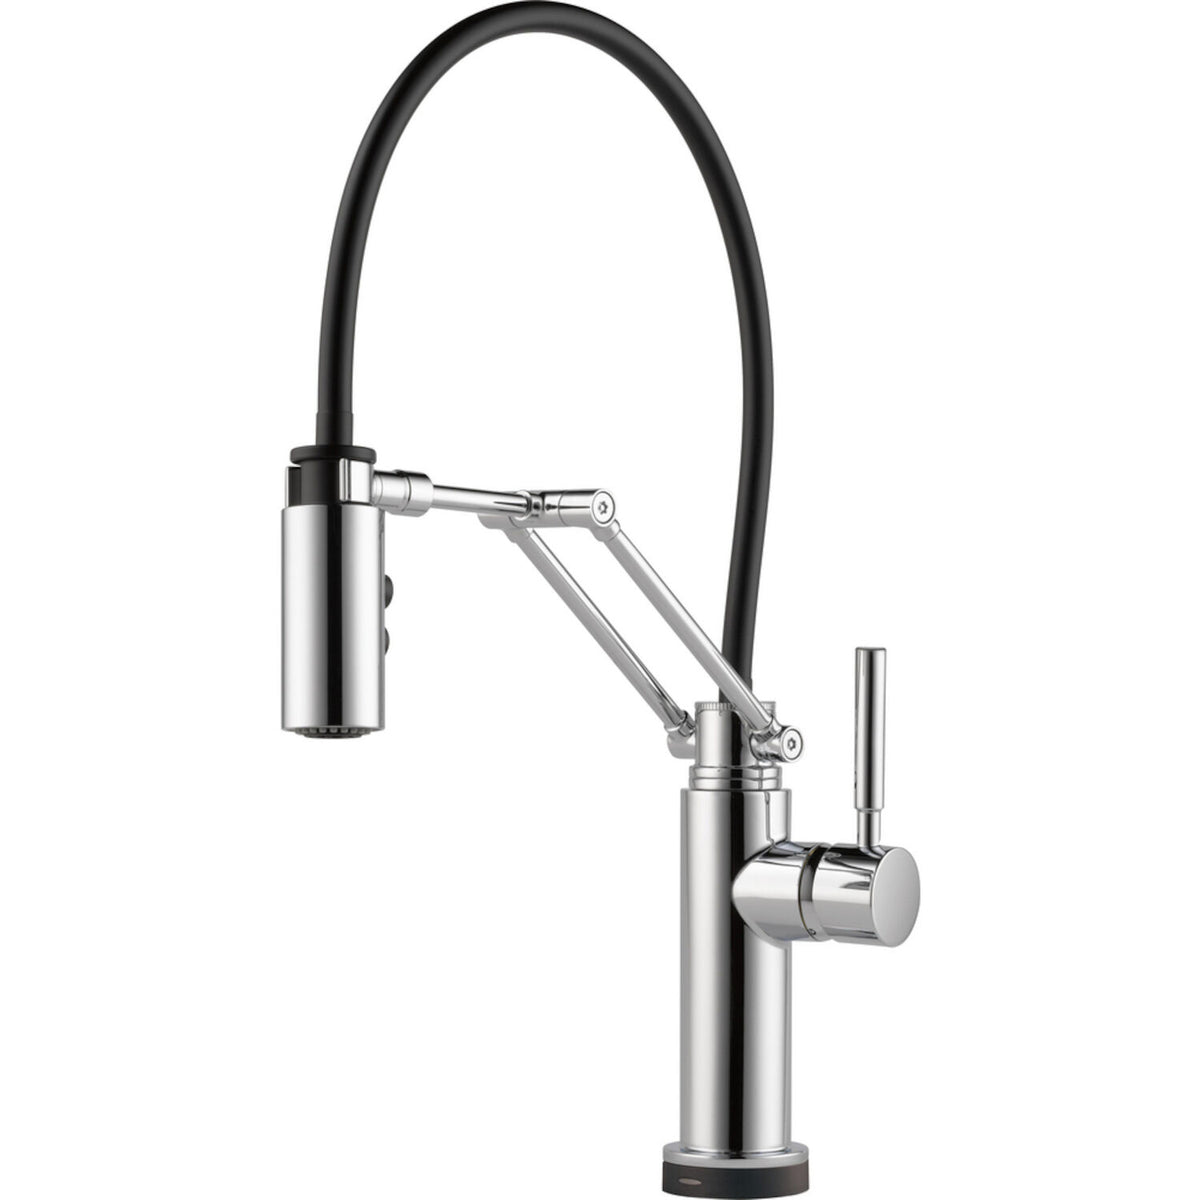 SOLNA® SINGLE HANDLE ARTICULATING ARM KITCHEN FAUCET WITH SMARTTOUCH TECHNOLOGY